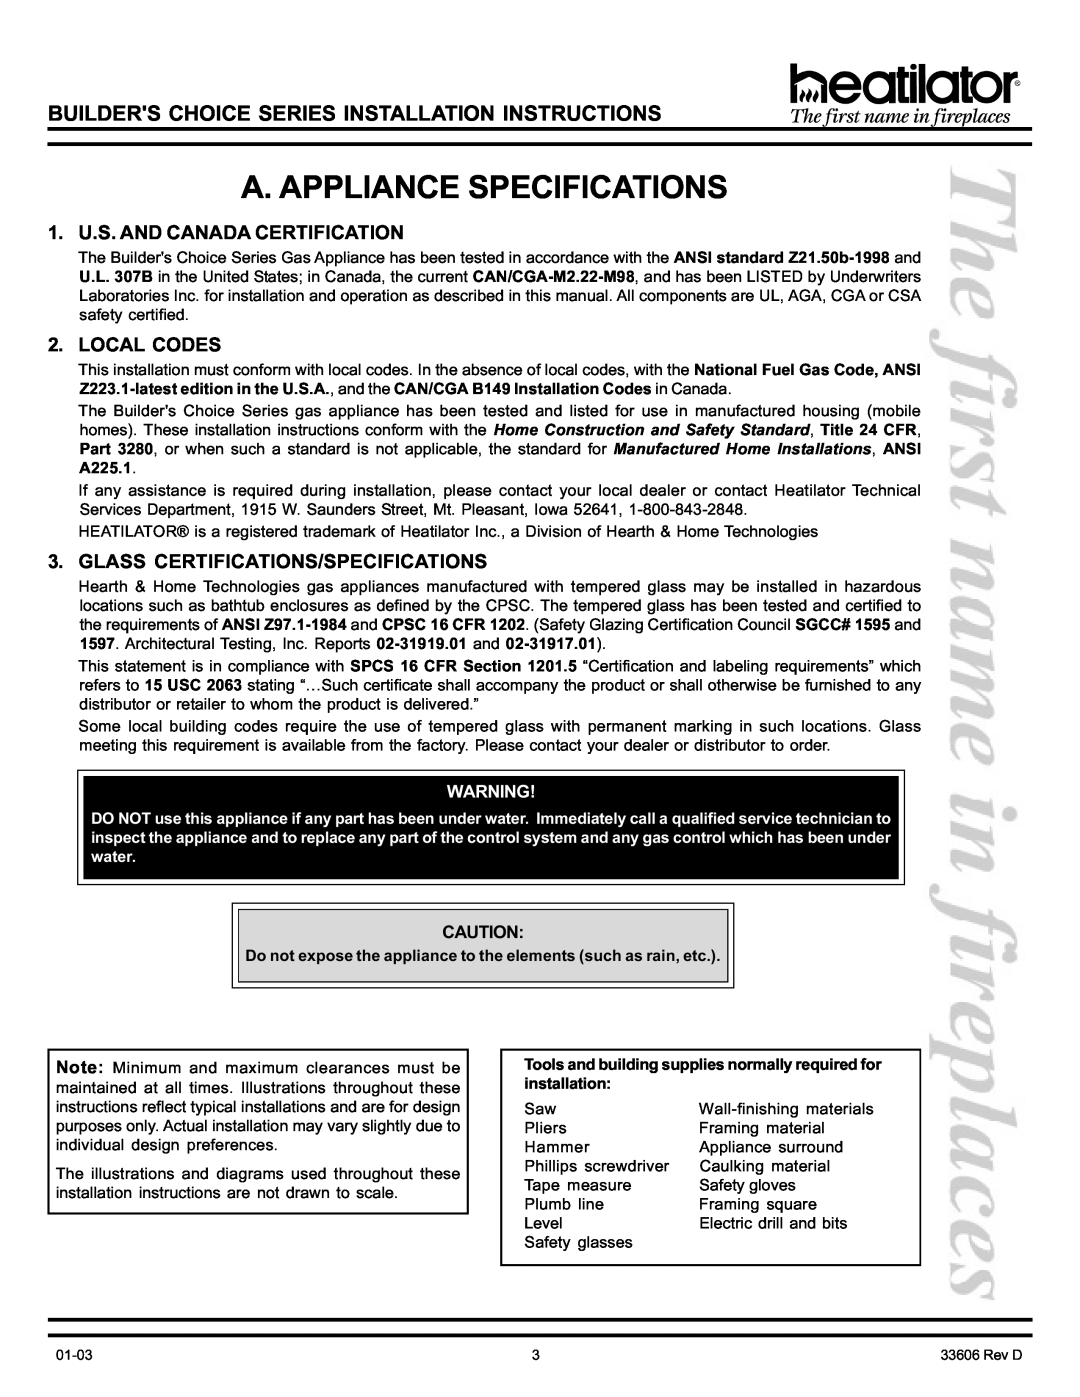 Heatiator BCDV36 manual A. Appliance Specifications, 1. U.S. AND CANADA CERTIFICATION, Local Codes 